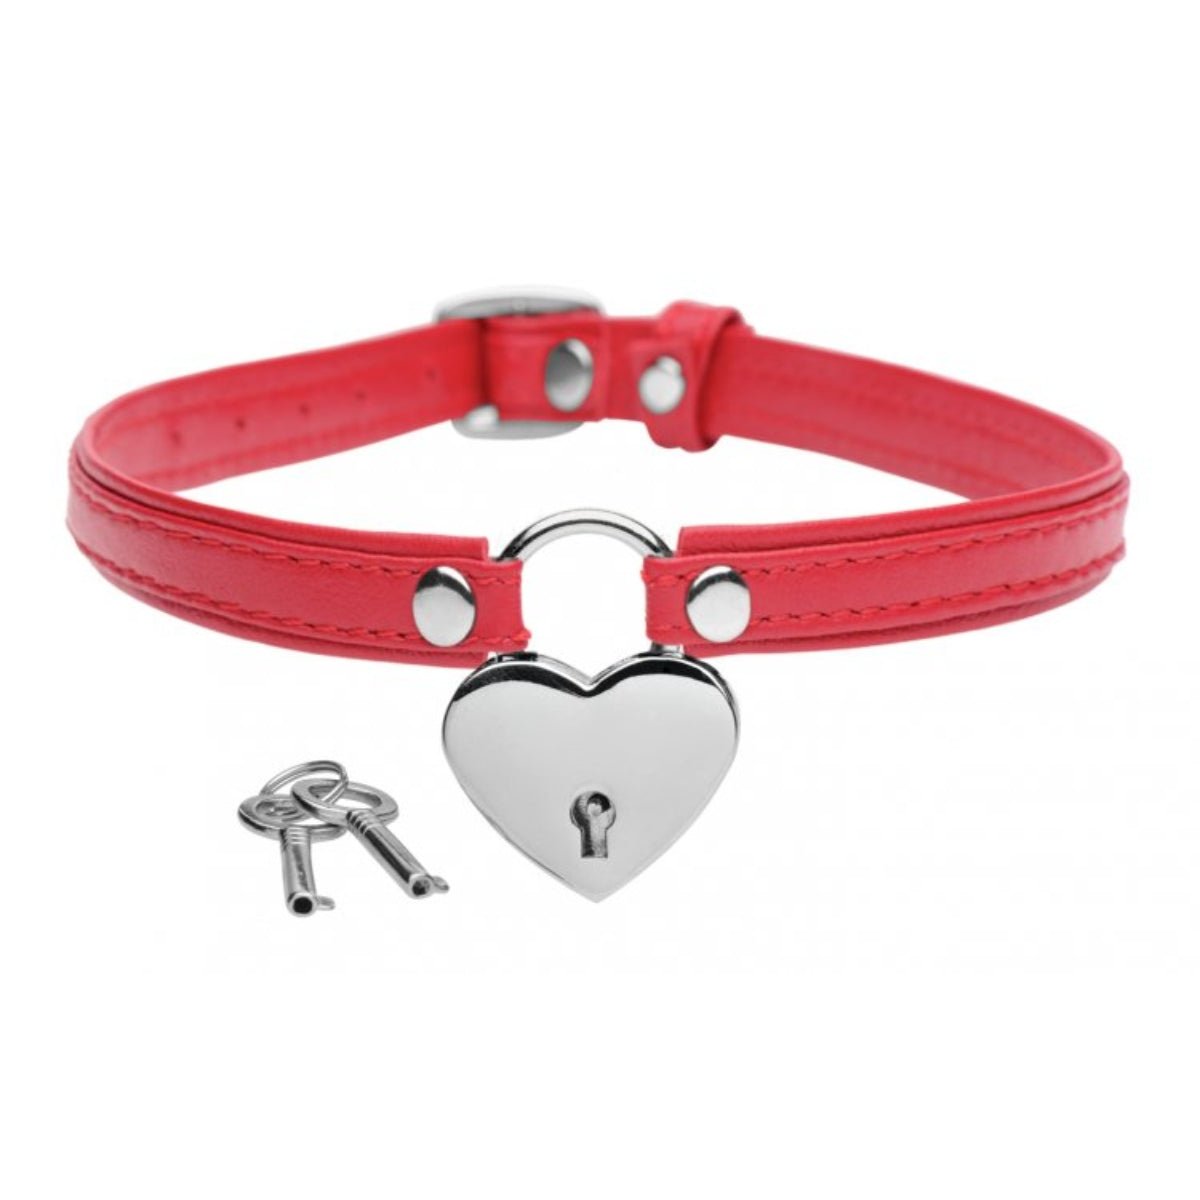 Collars & Leads Master Series Heart Lock Choker With Keys Red   